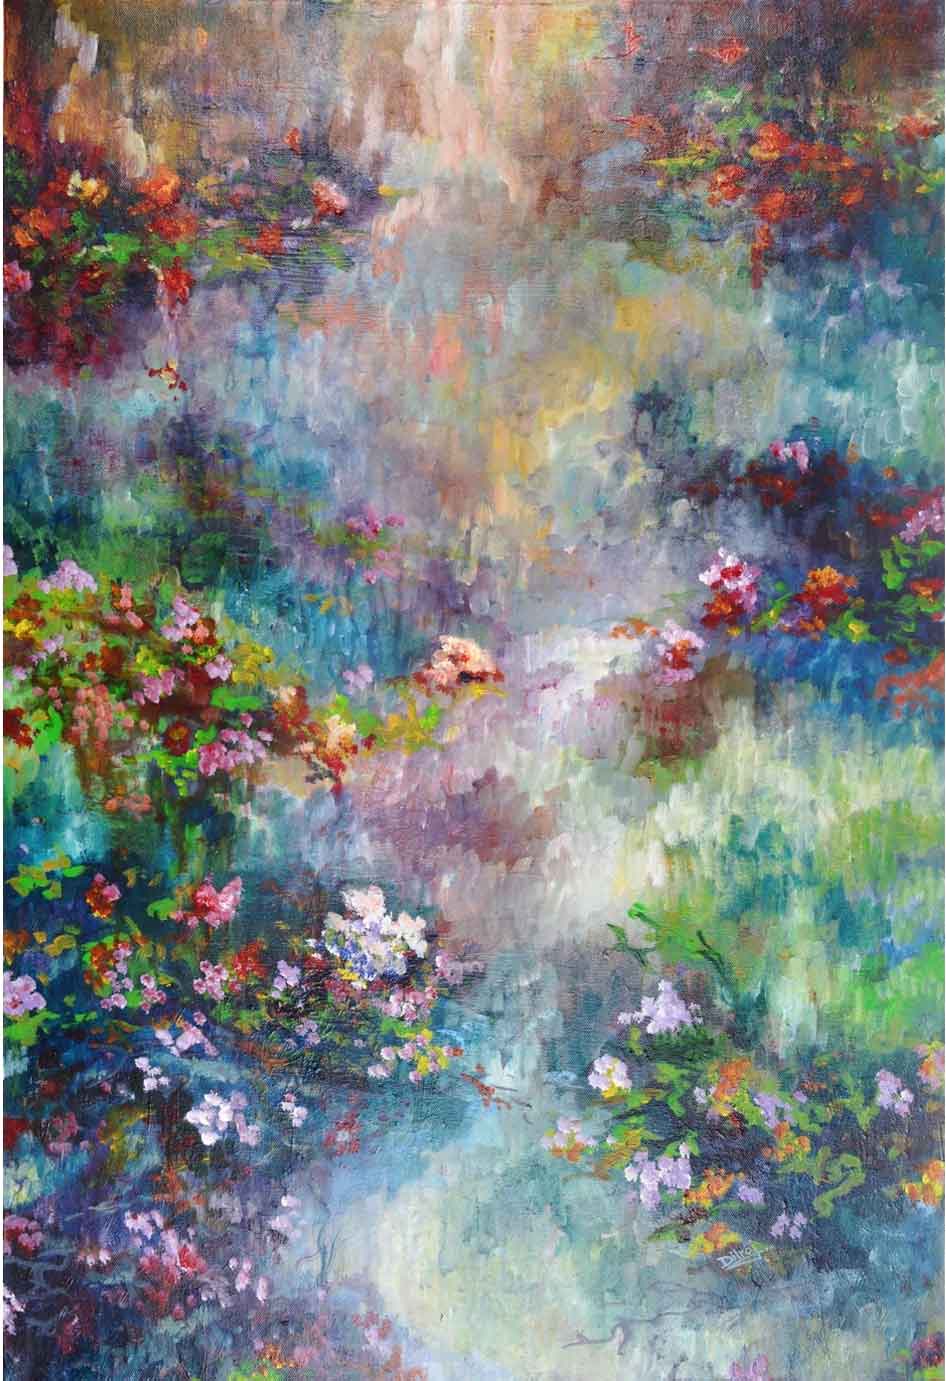 Contemporary Painting with Acrylic on Canvas "Finding path" art by Dilraj Kaur